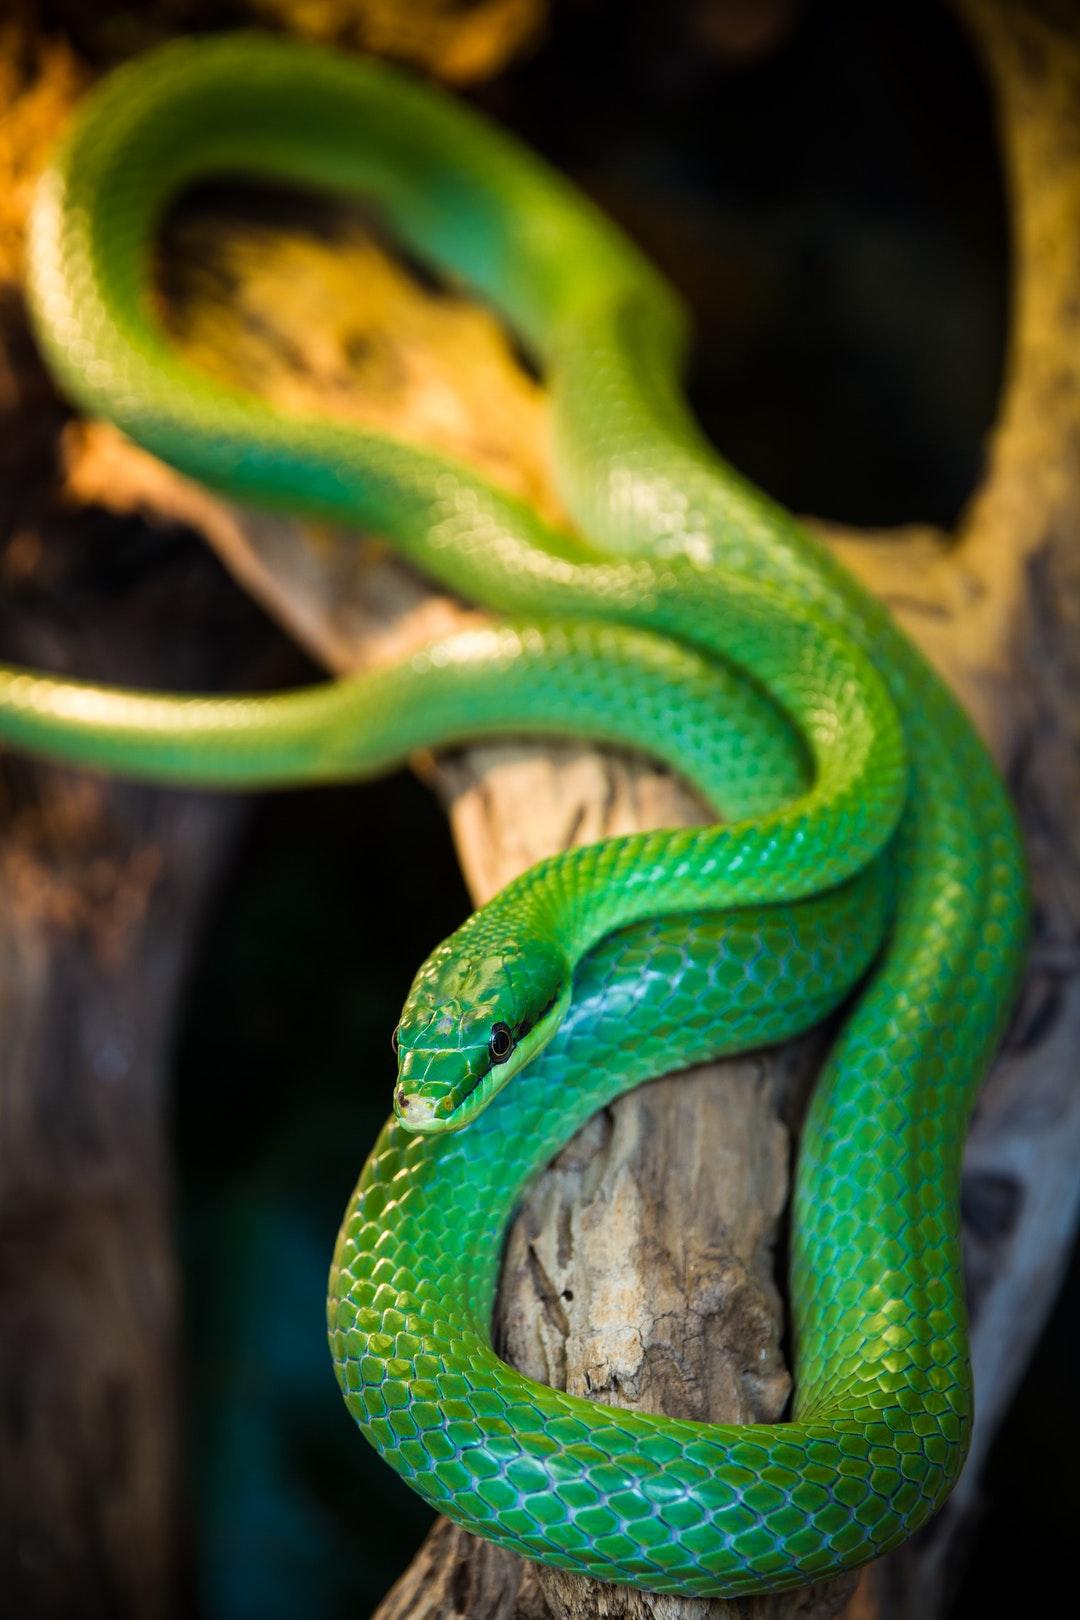 The green African tree viper wallpaper Gallery